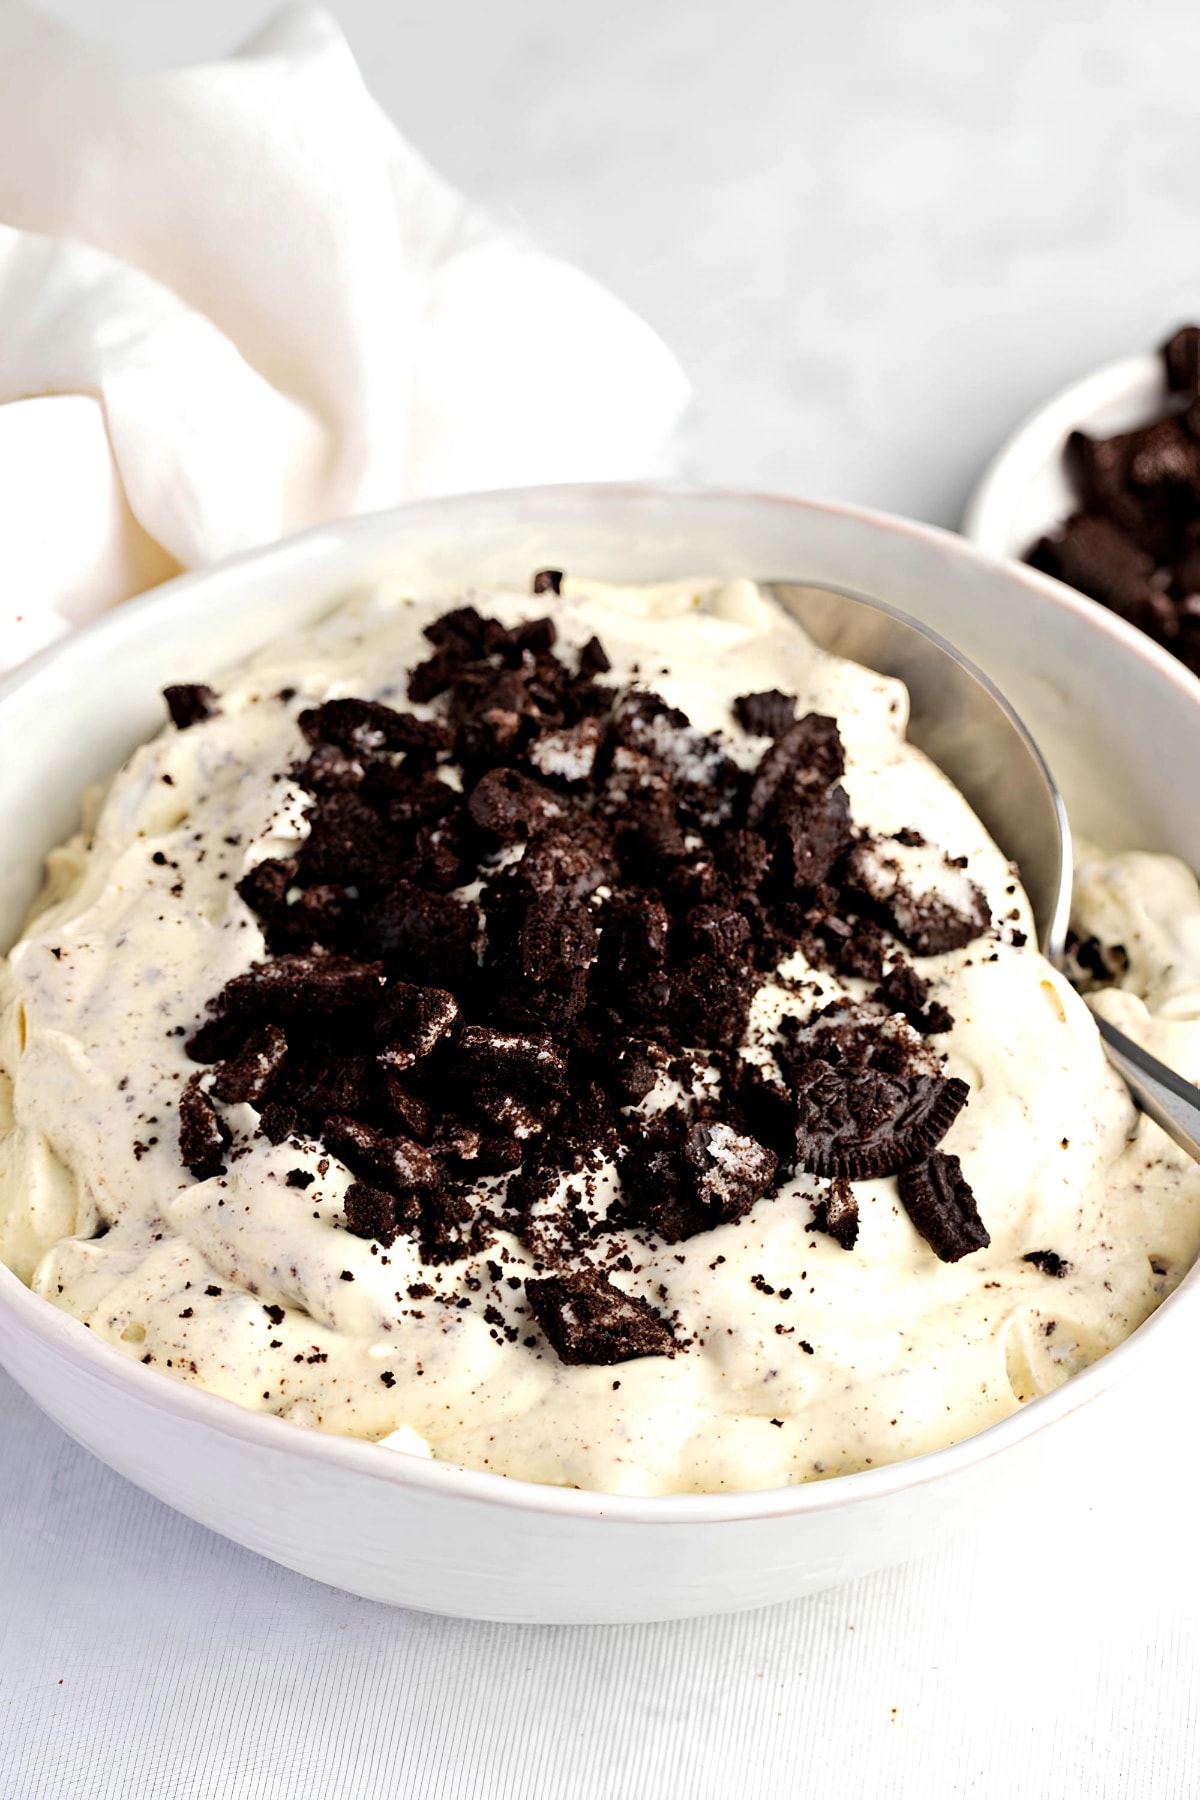 Easy Oreo Fluff featuring Oreo Fluff in a White Bowl Topped with More Oreo Crumbles